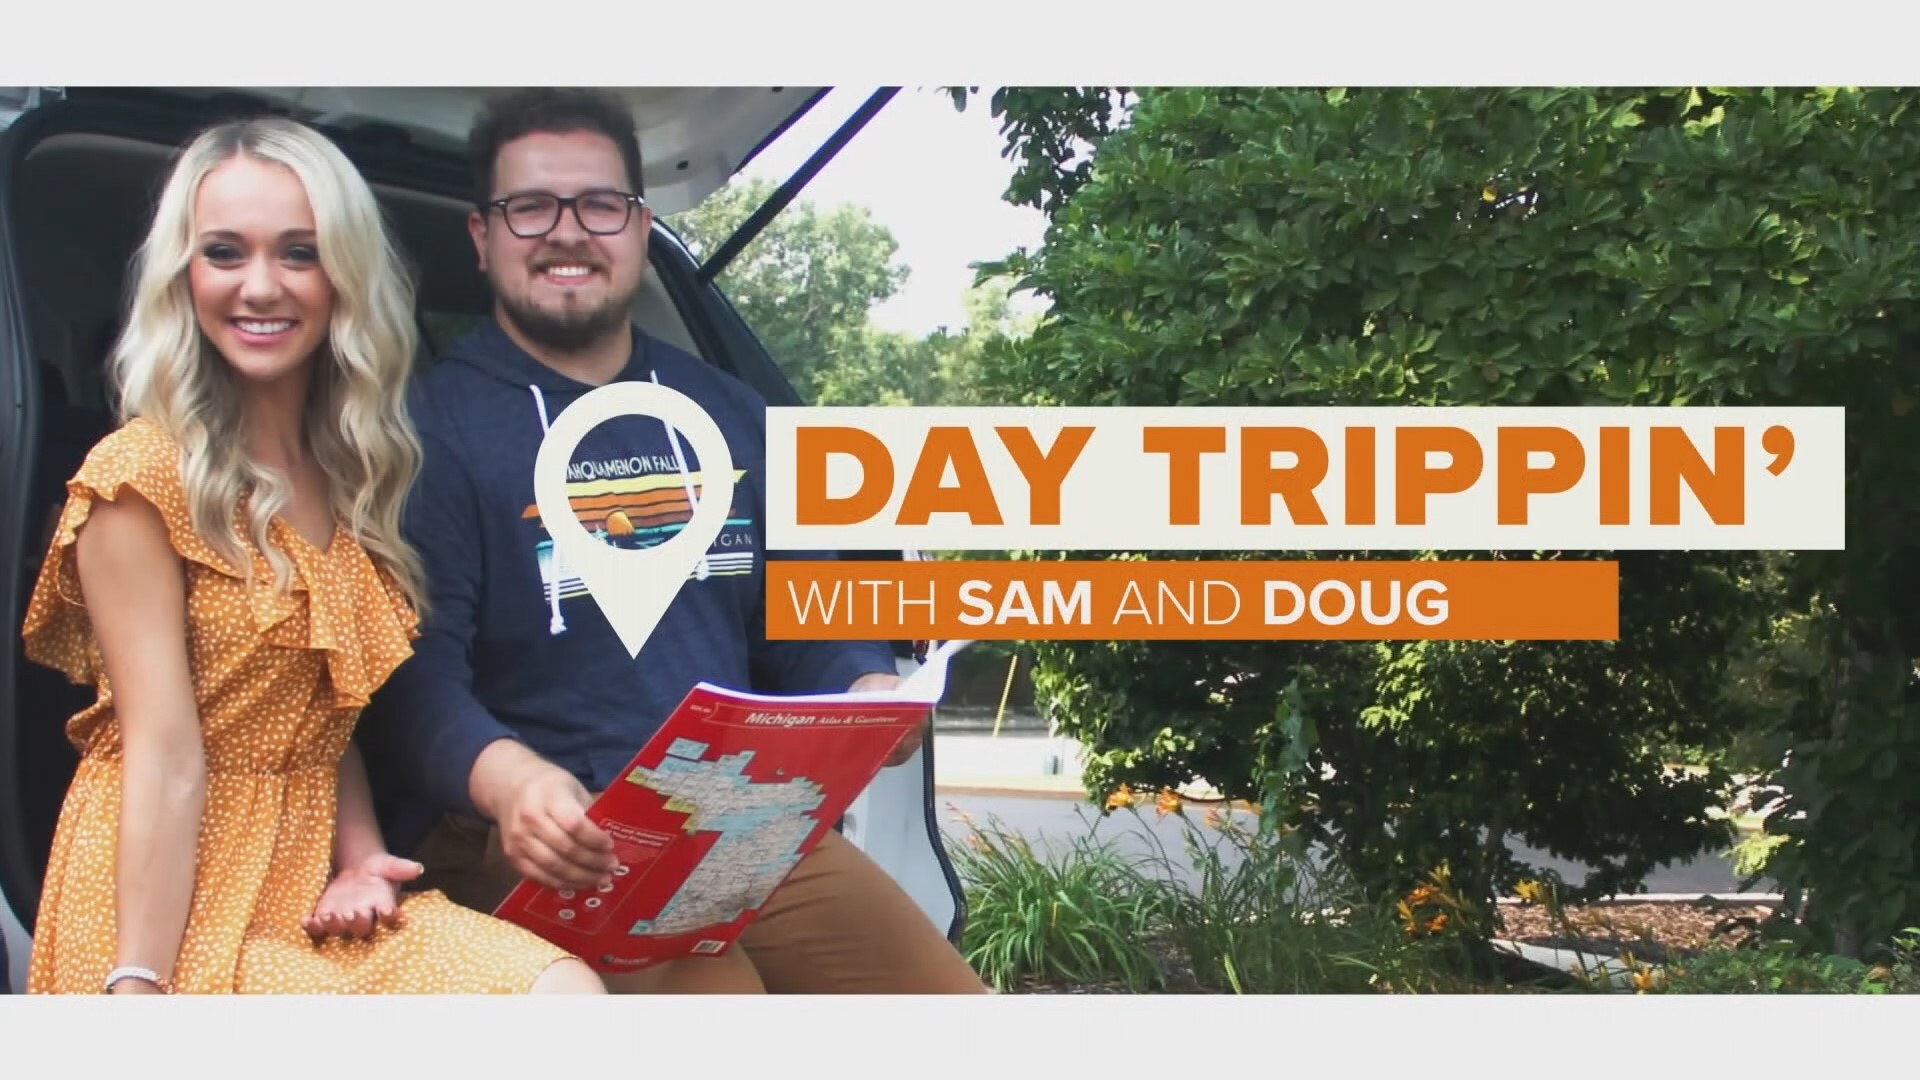 Join Sam and Doug as they take day trips around West Michigan showing off everything you can do in 11 cities in the area.